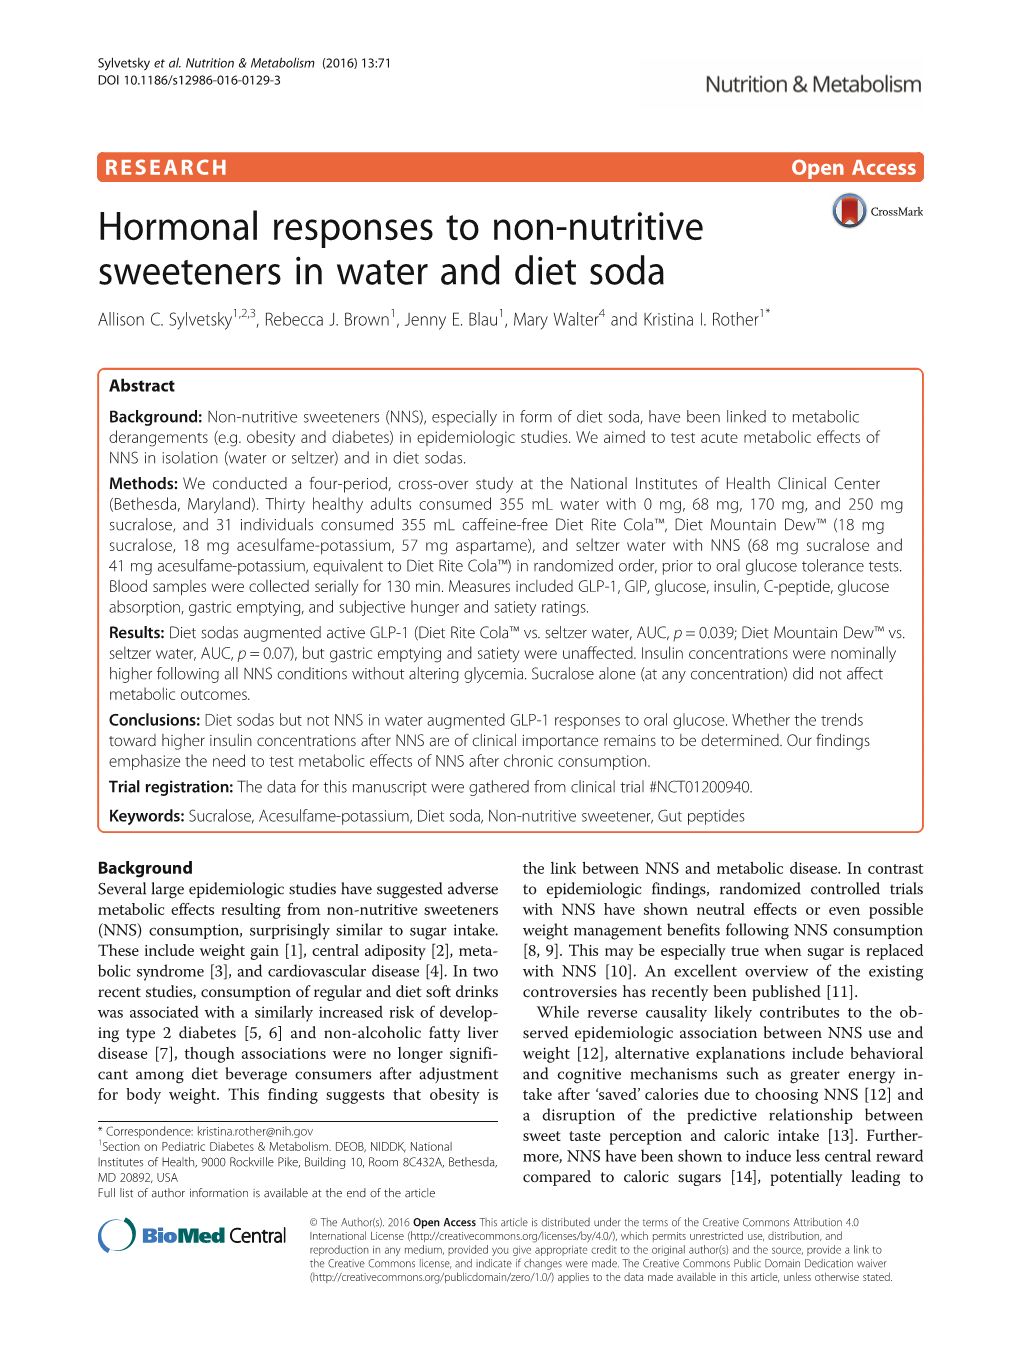 Hormonal Responses to Non-Nutritive Sweeteners in Water and Diet Soda Allison C